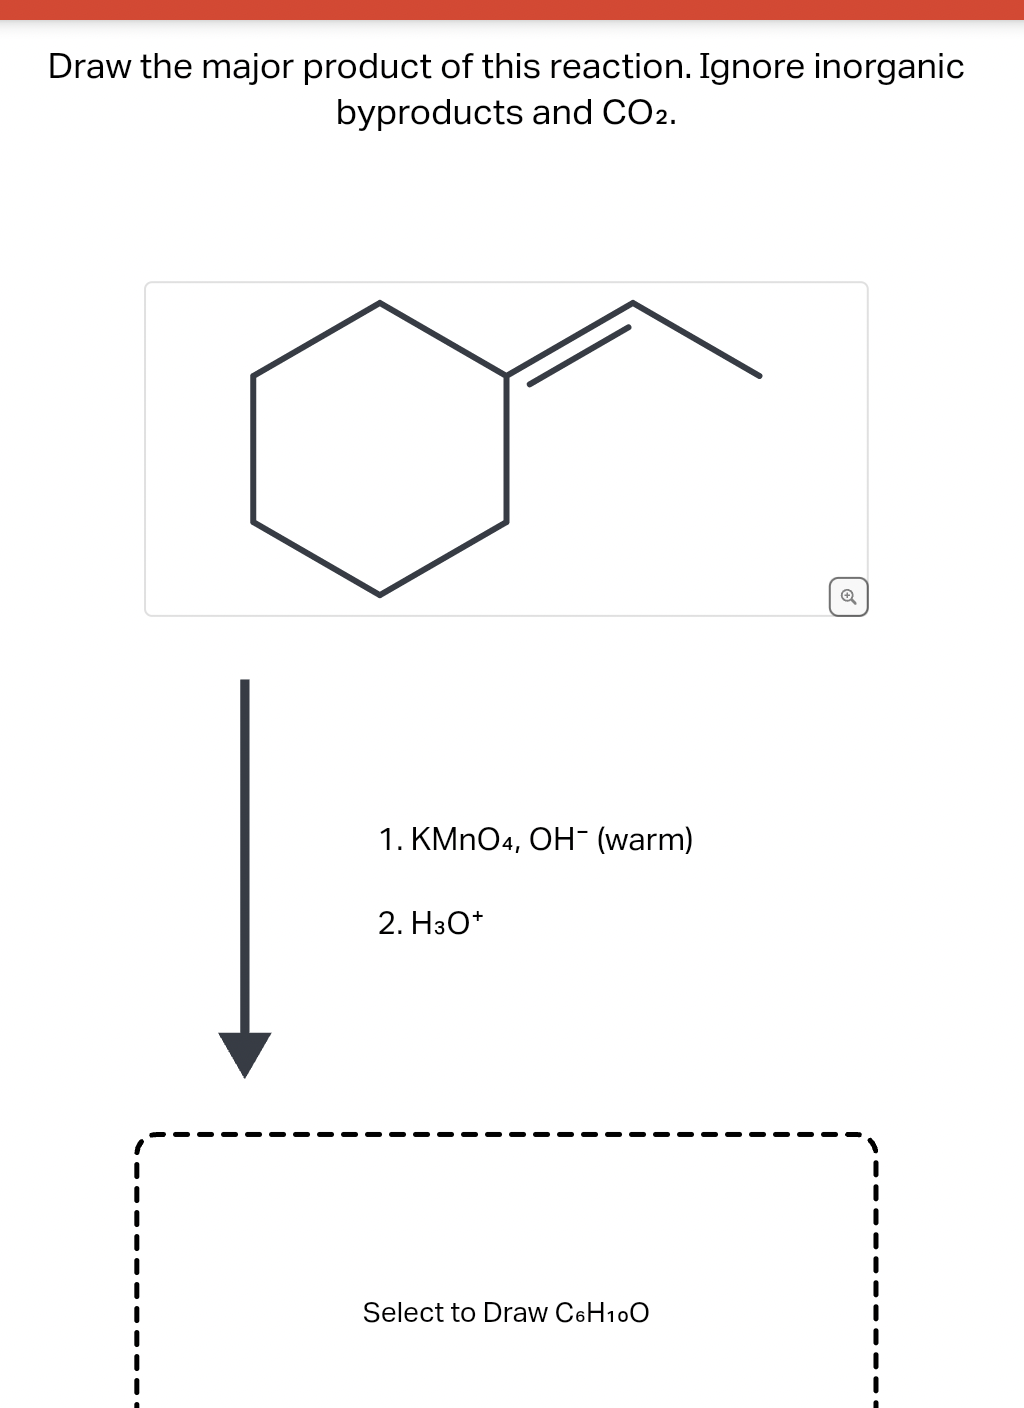 Draw the major product of this reaction. Ignore inorganic
byproducts and CO2.
1. KMnO4, OH¯ (warm)
2. H3O+
Select to Draw C6H10O
✓